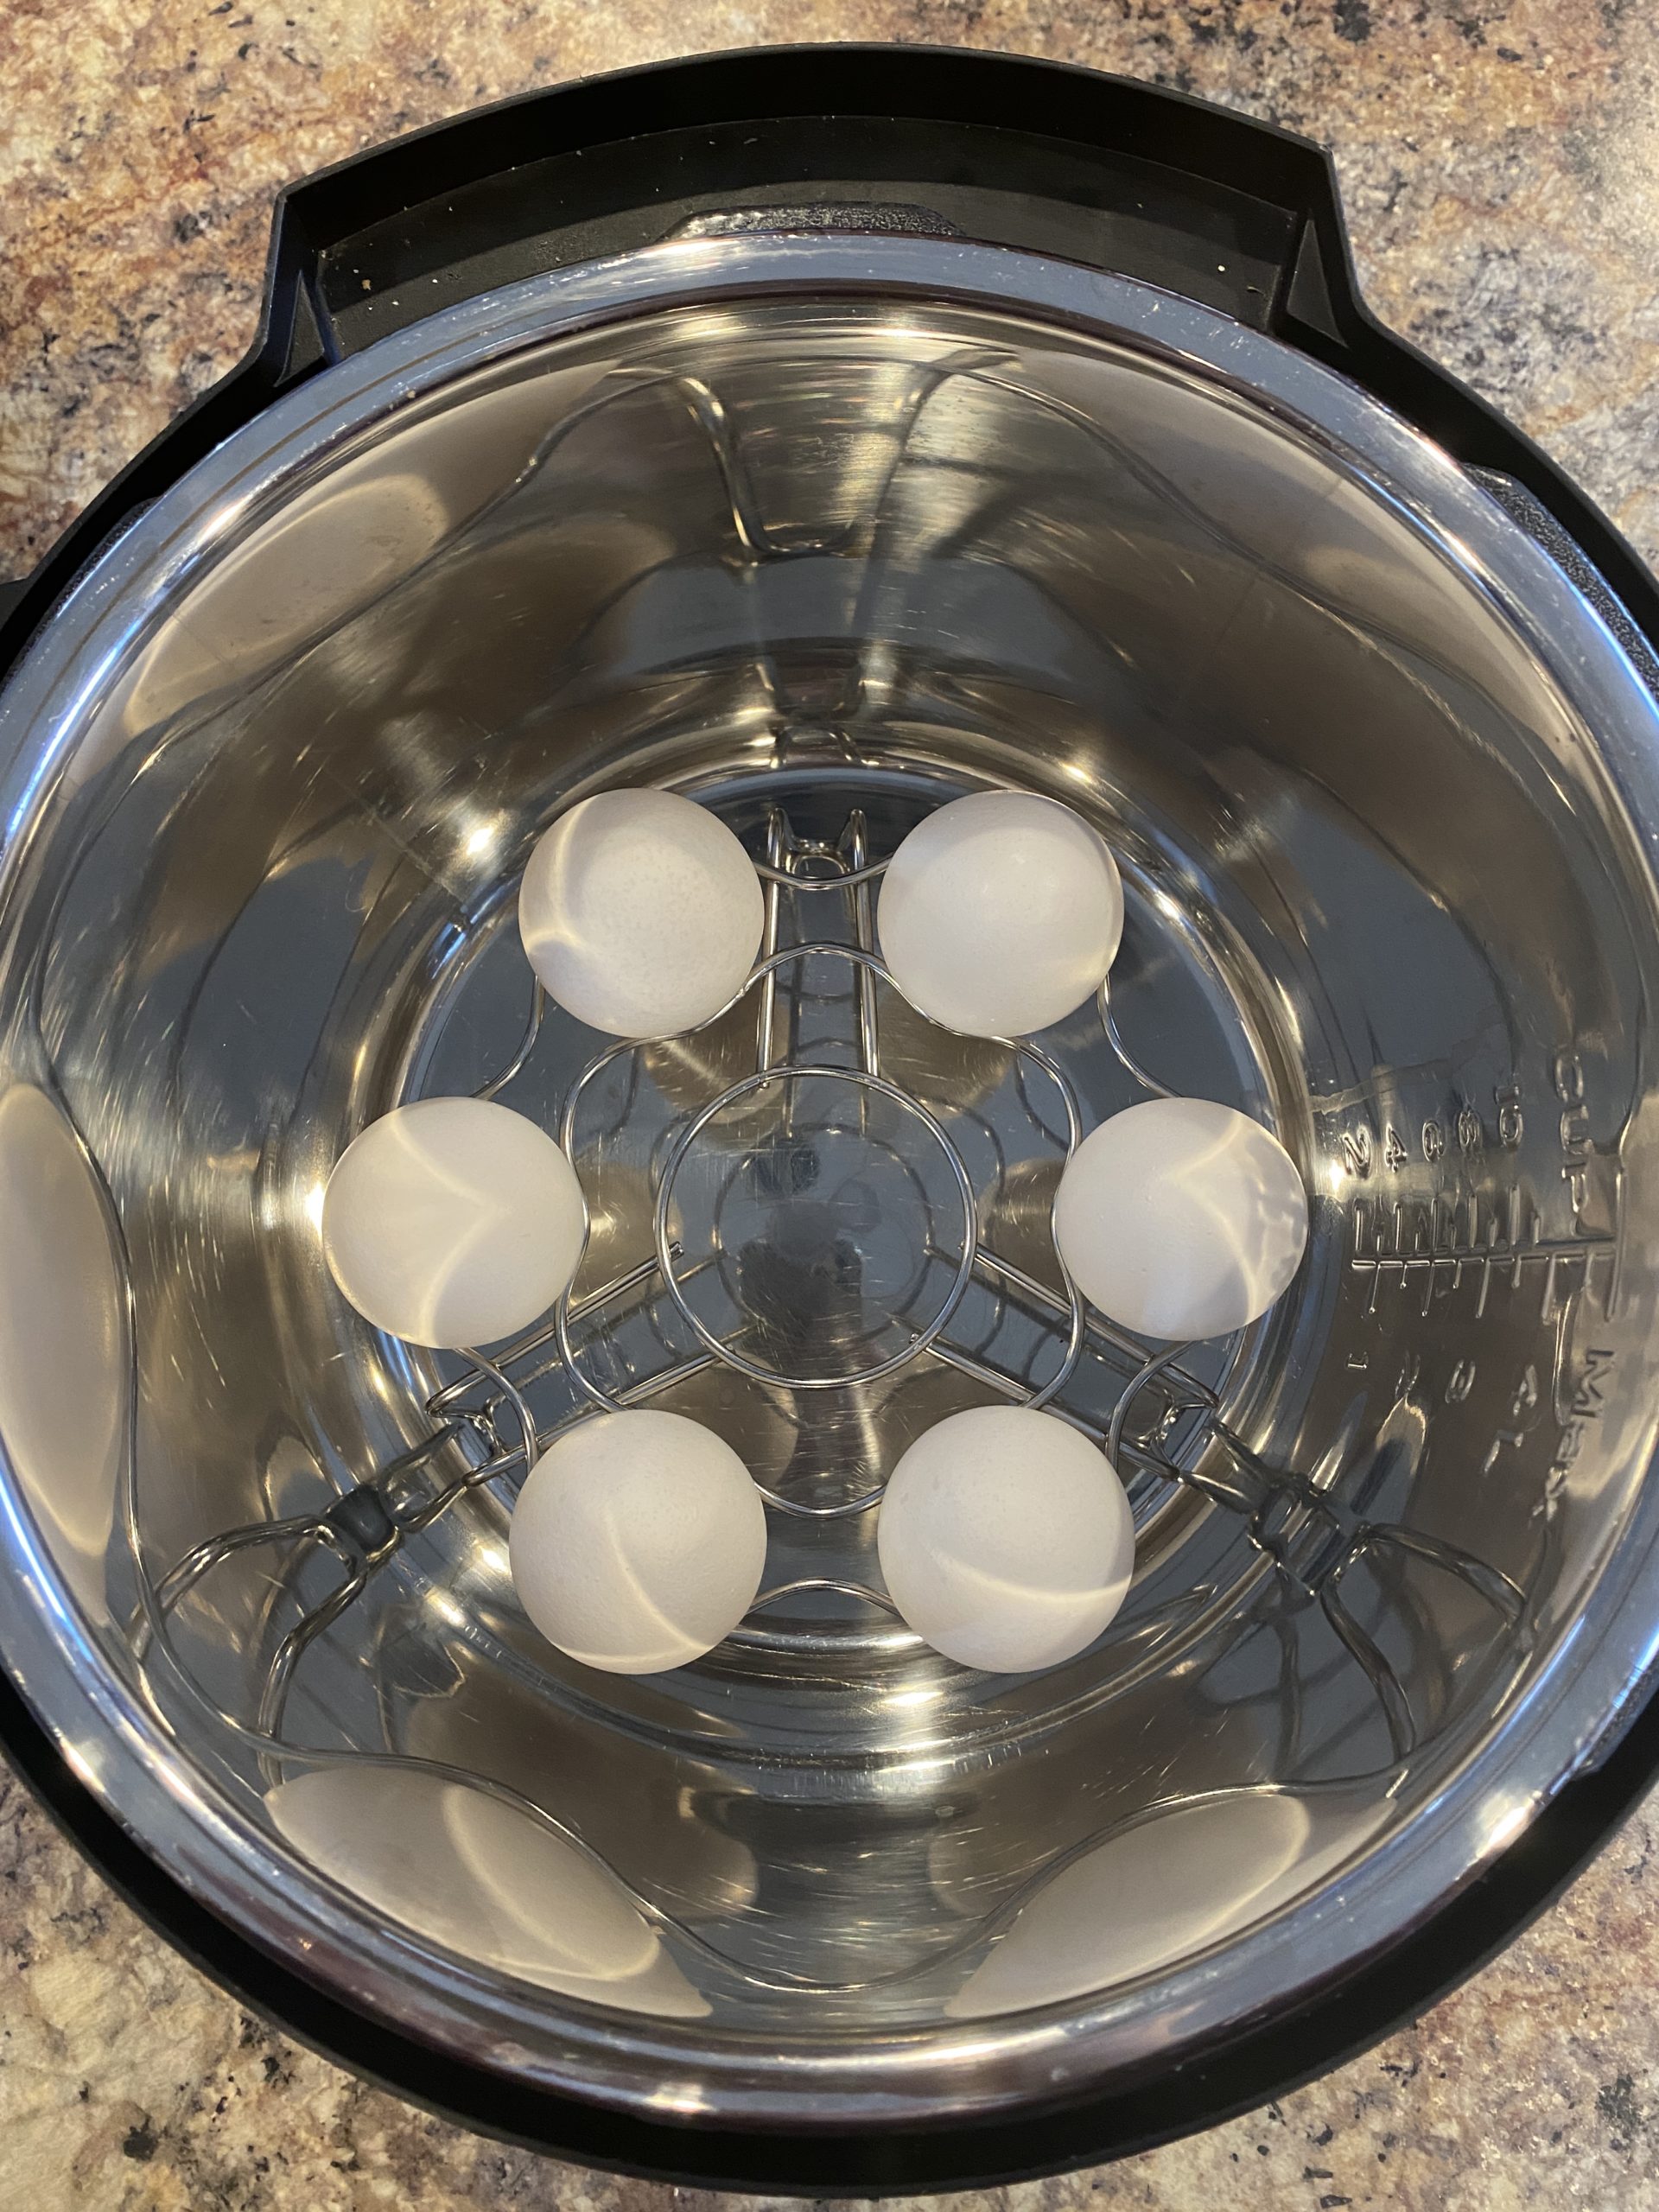 Hard cooked eggs made in an instant pot